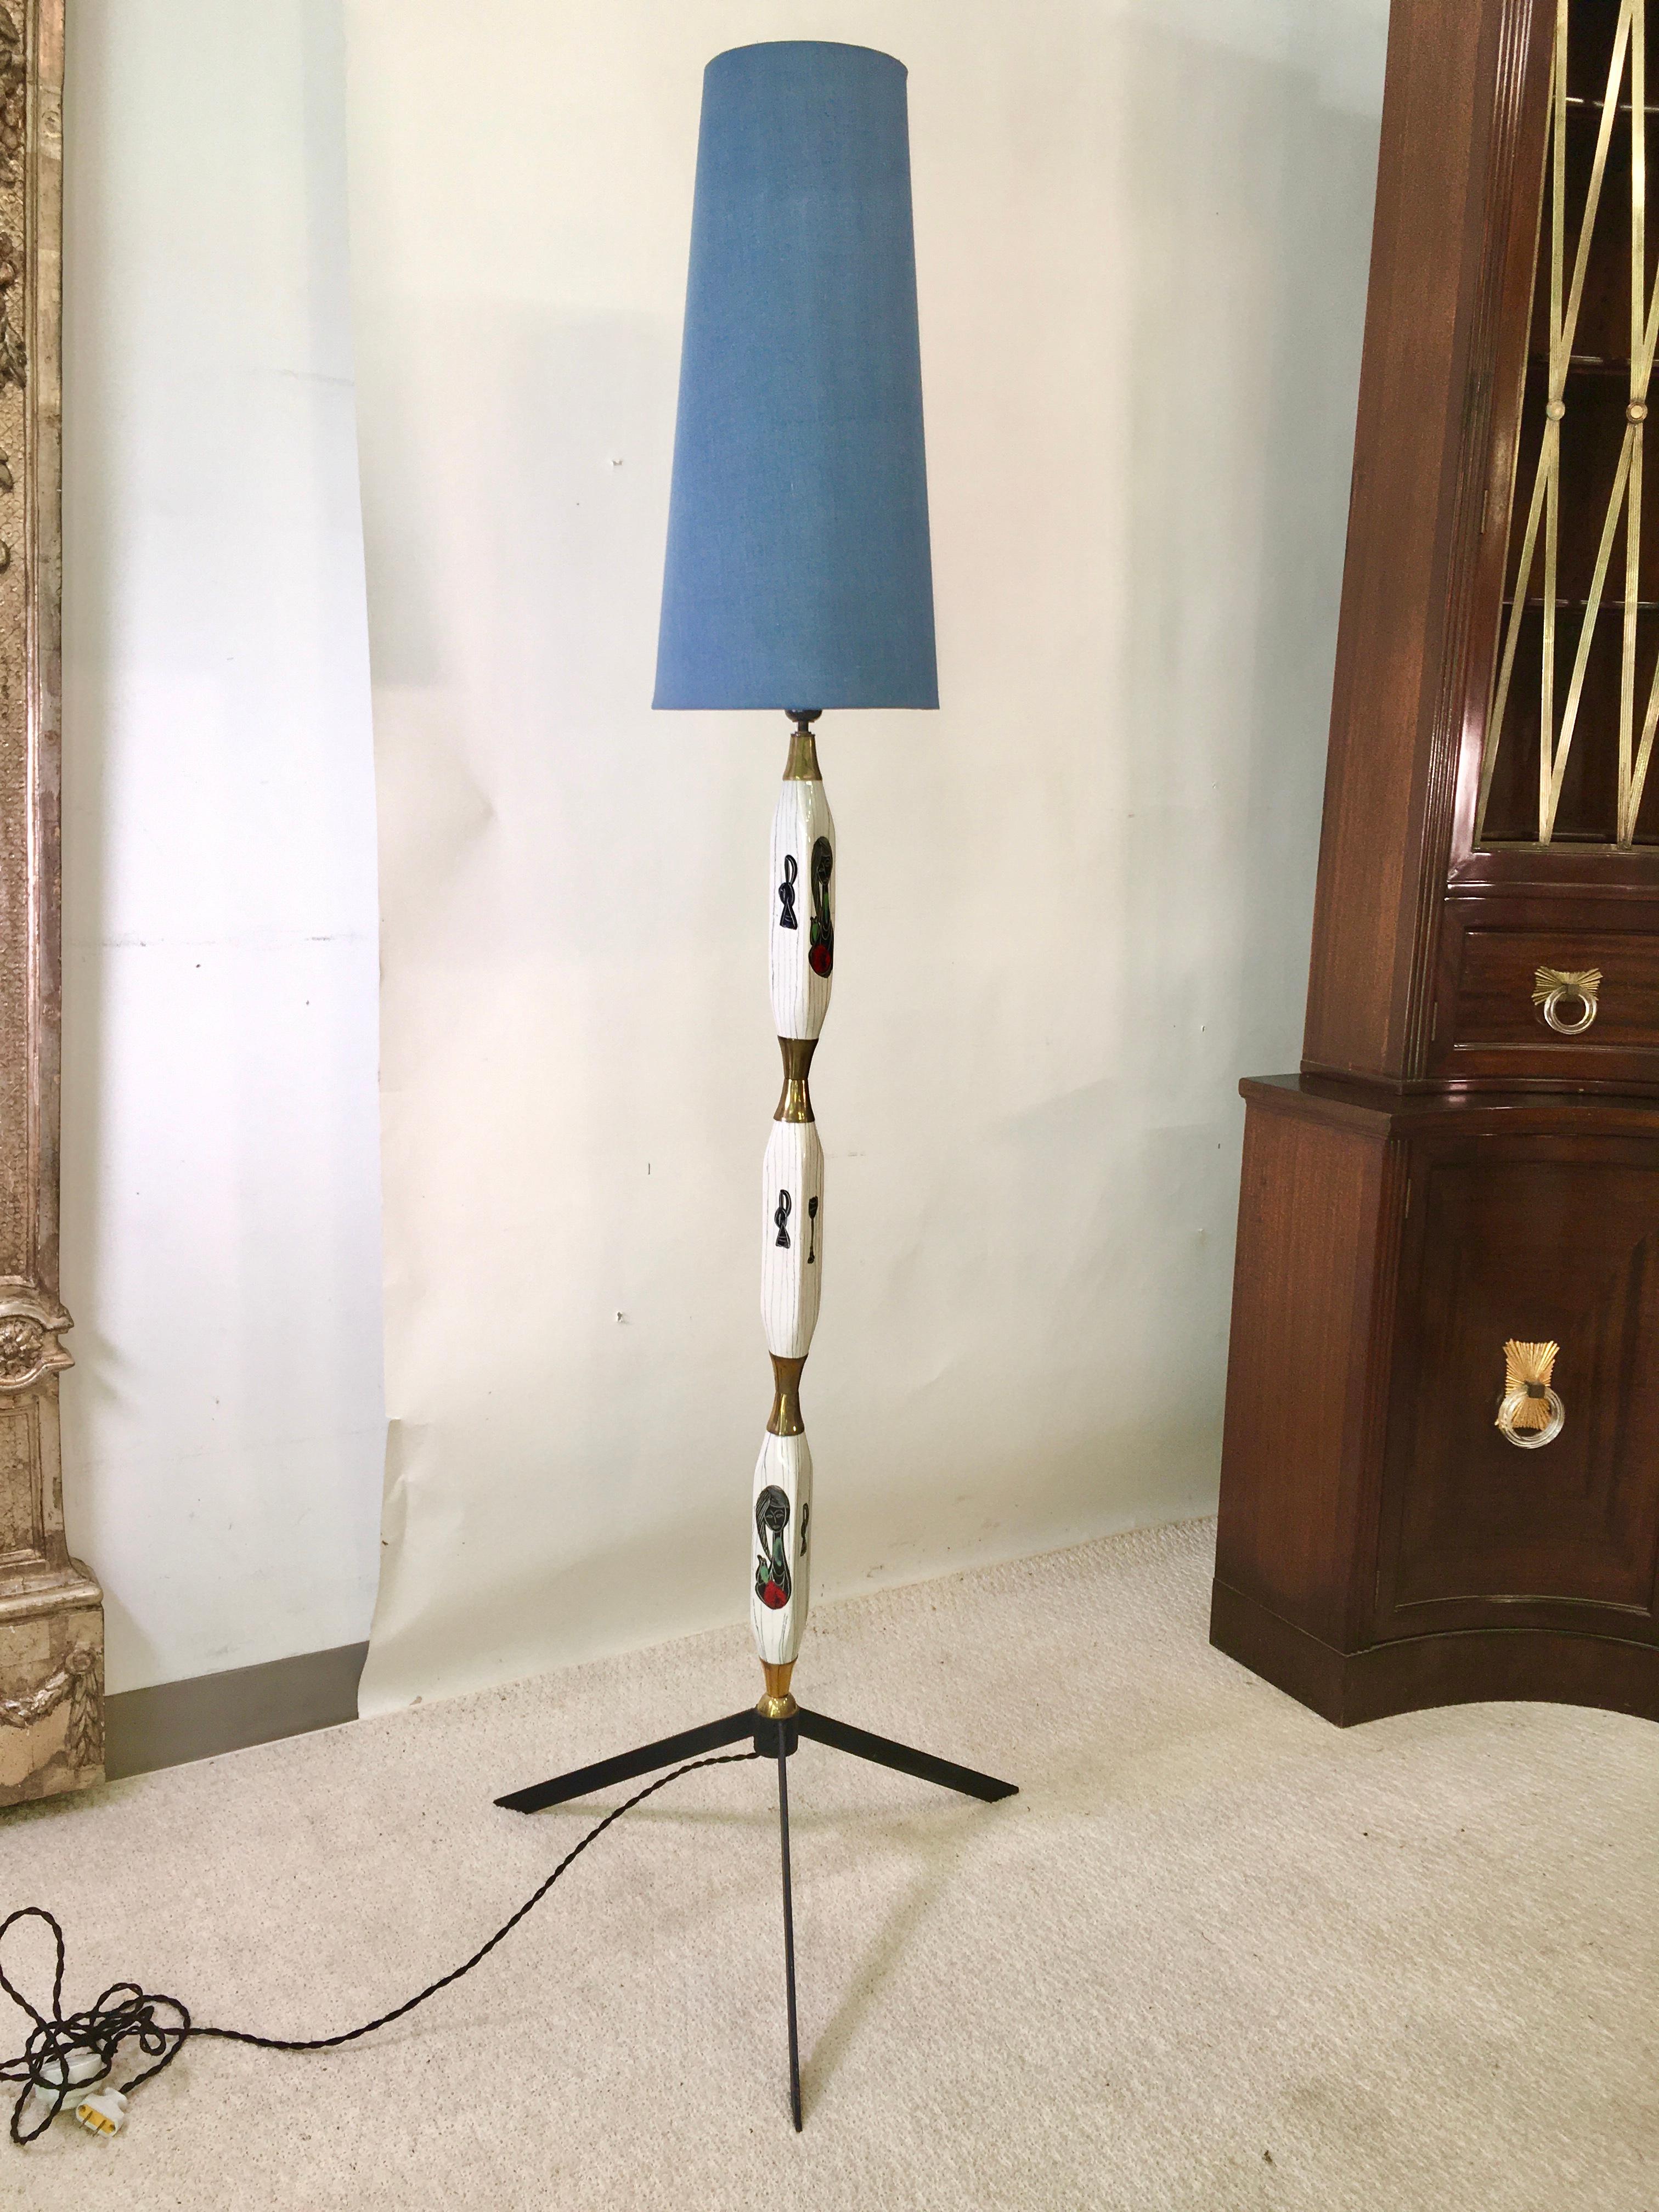 1950's Italian floor lamp adorned with several glazed ceramic vessels in highly stylized asymmetric form. separated by diabolo form hourglass brass spacers and standing on a black metal tripod base . Hand-painted abstract figures and objects on each